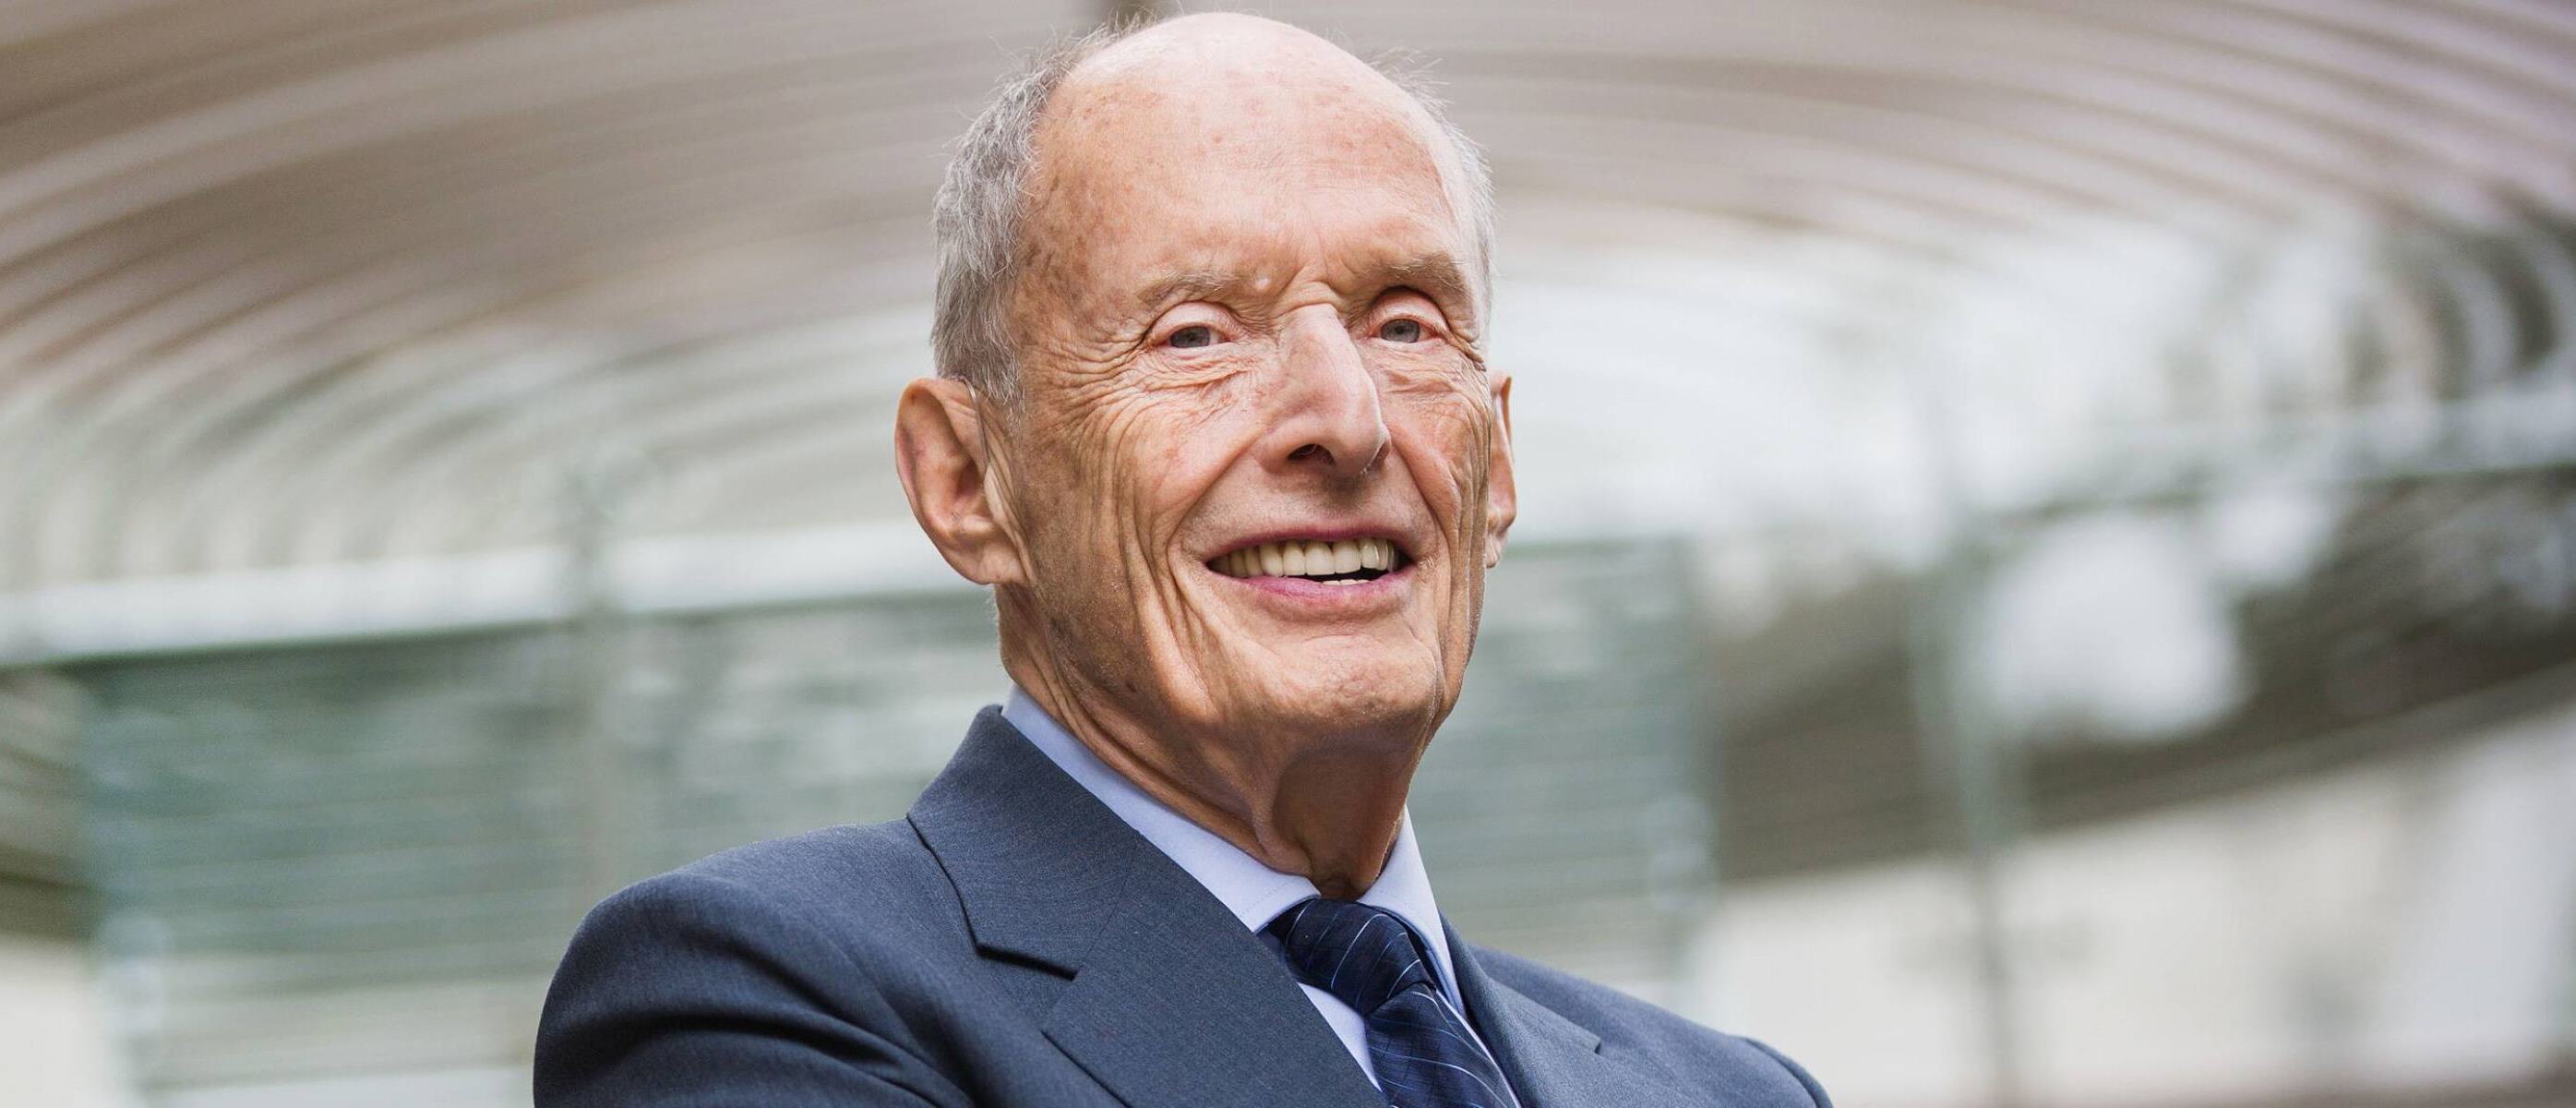 20-captivating-facts-about-dr-paul-greengard